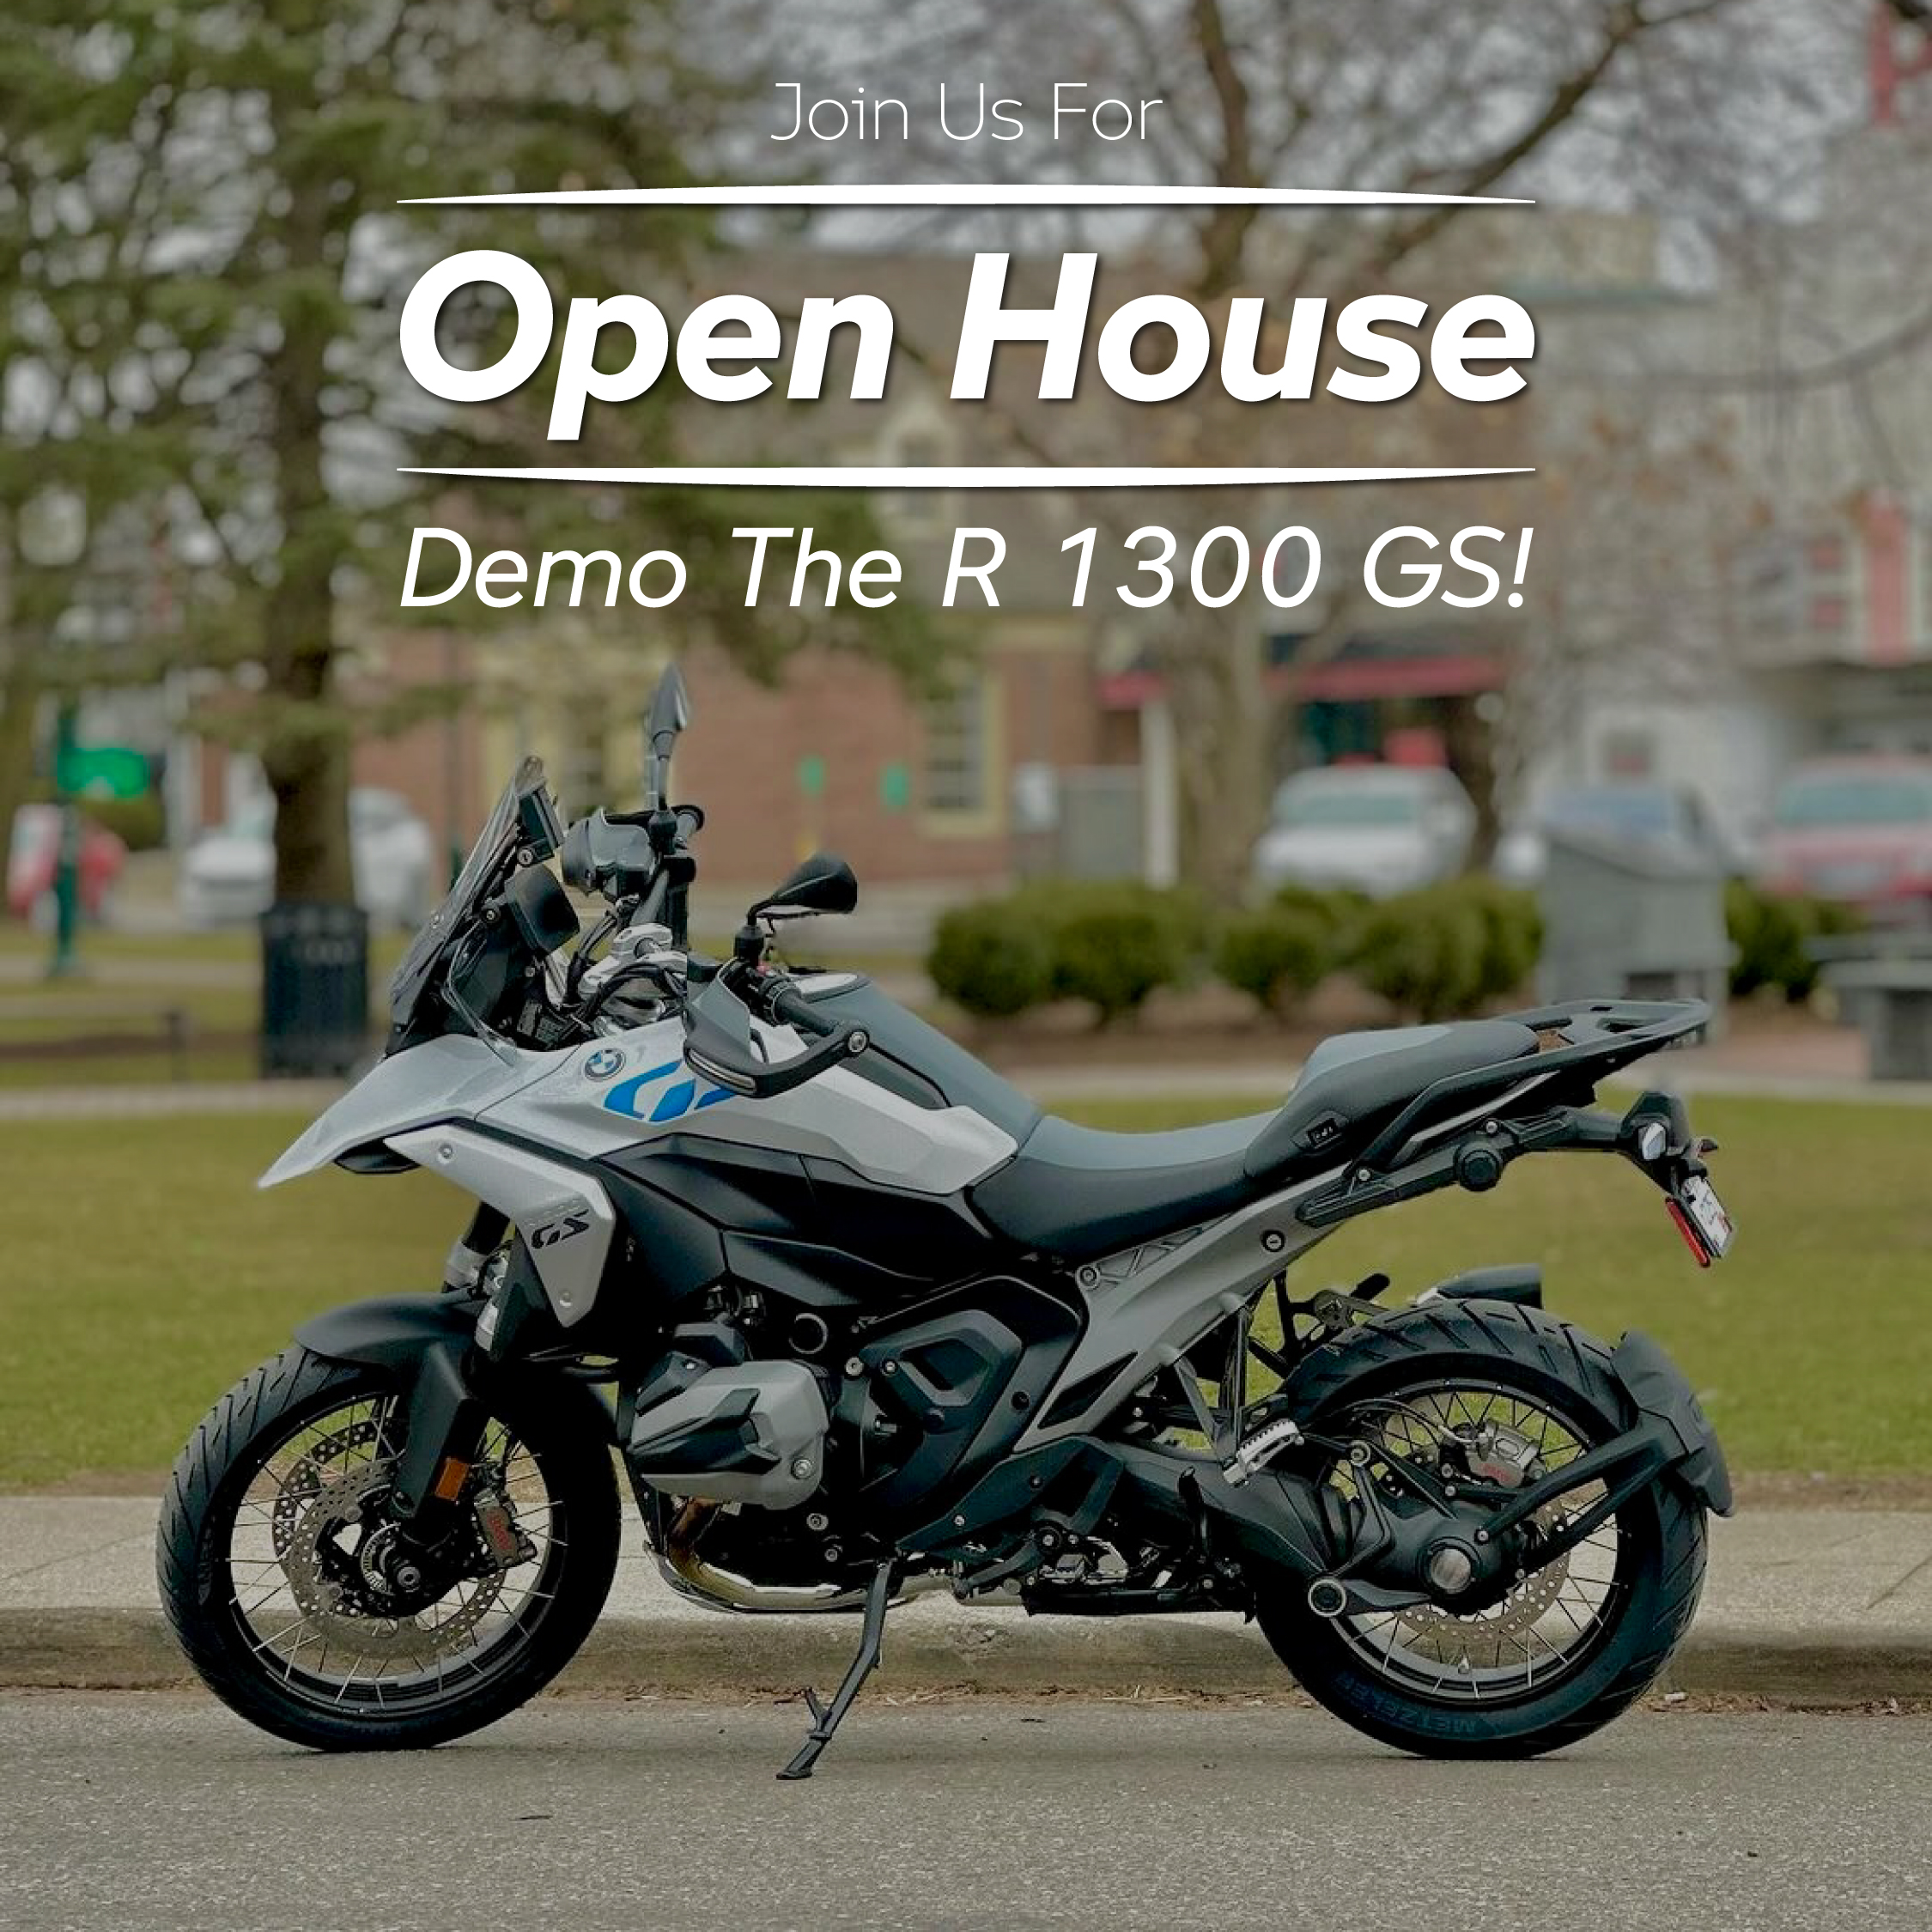 BMW Open House R 1300 GS Demo Event For Social 01